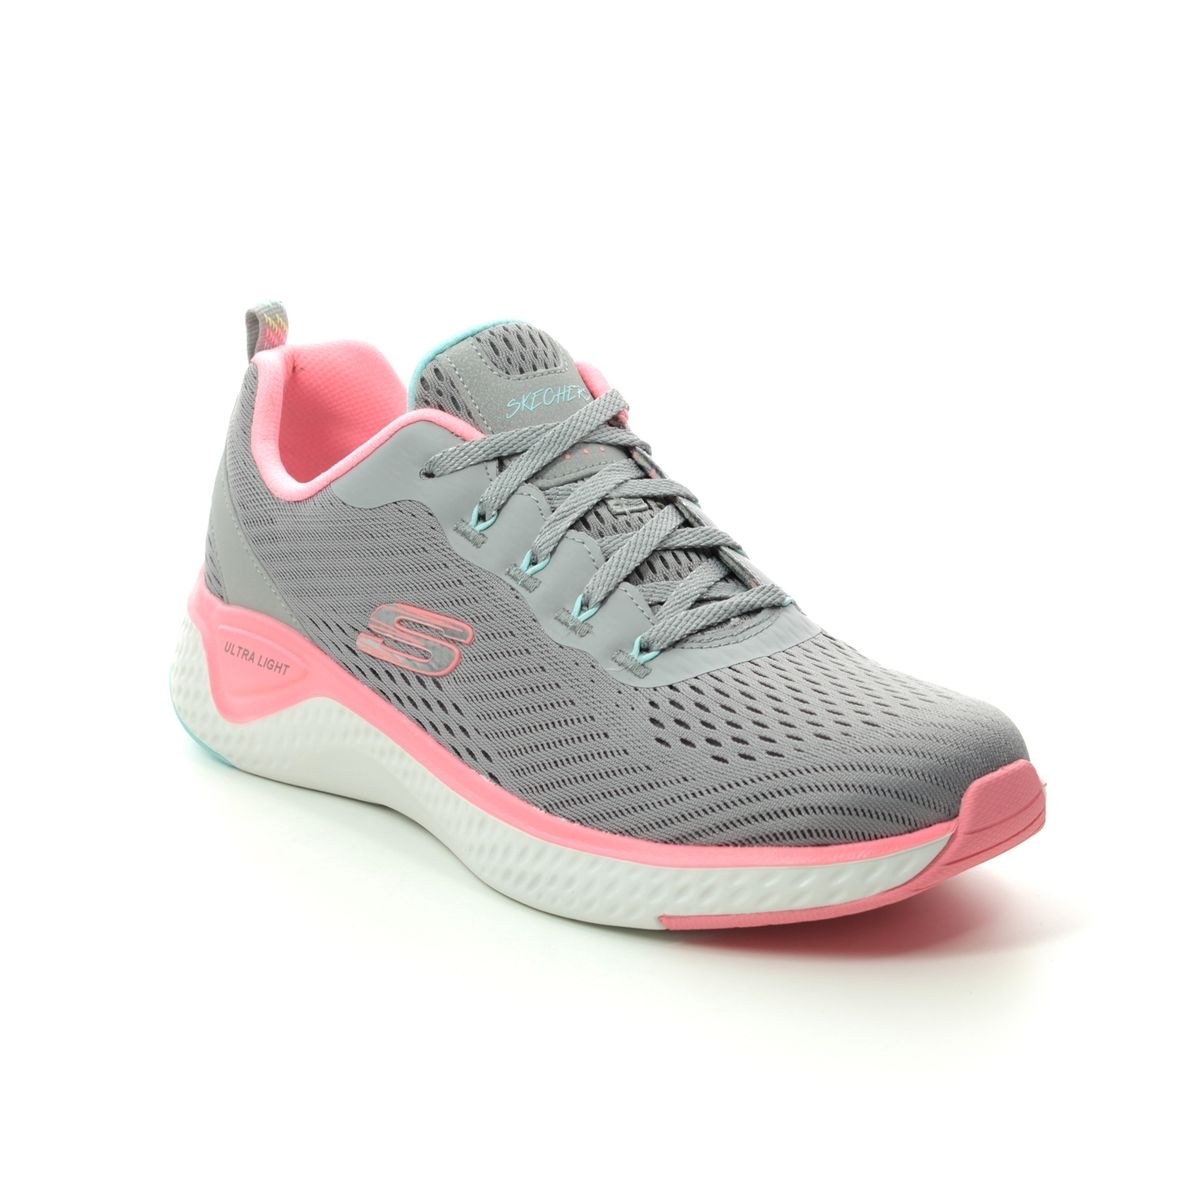 pink lace skechers